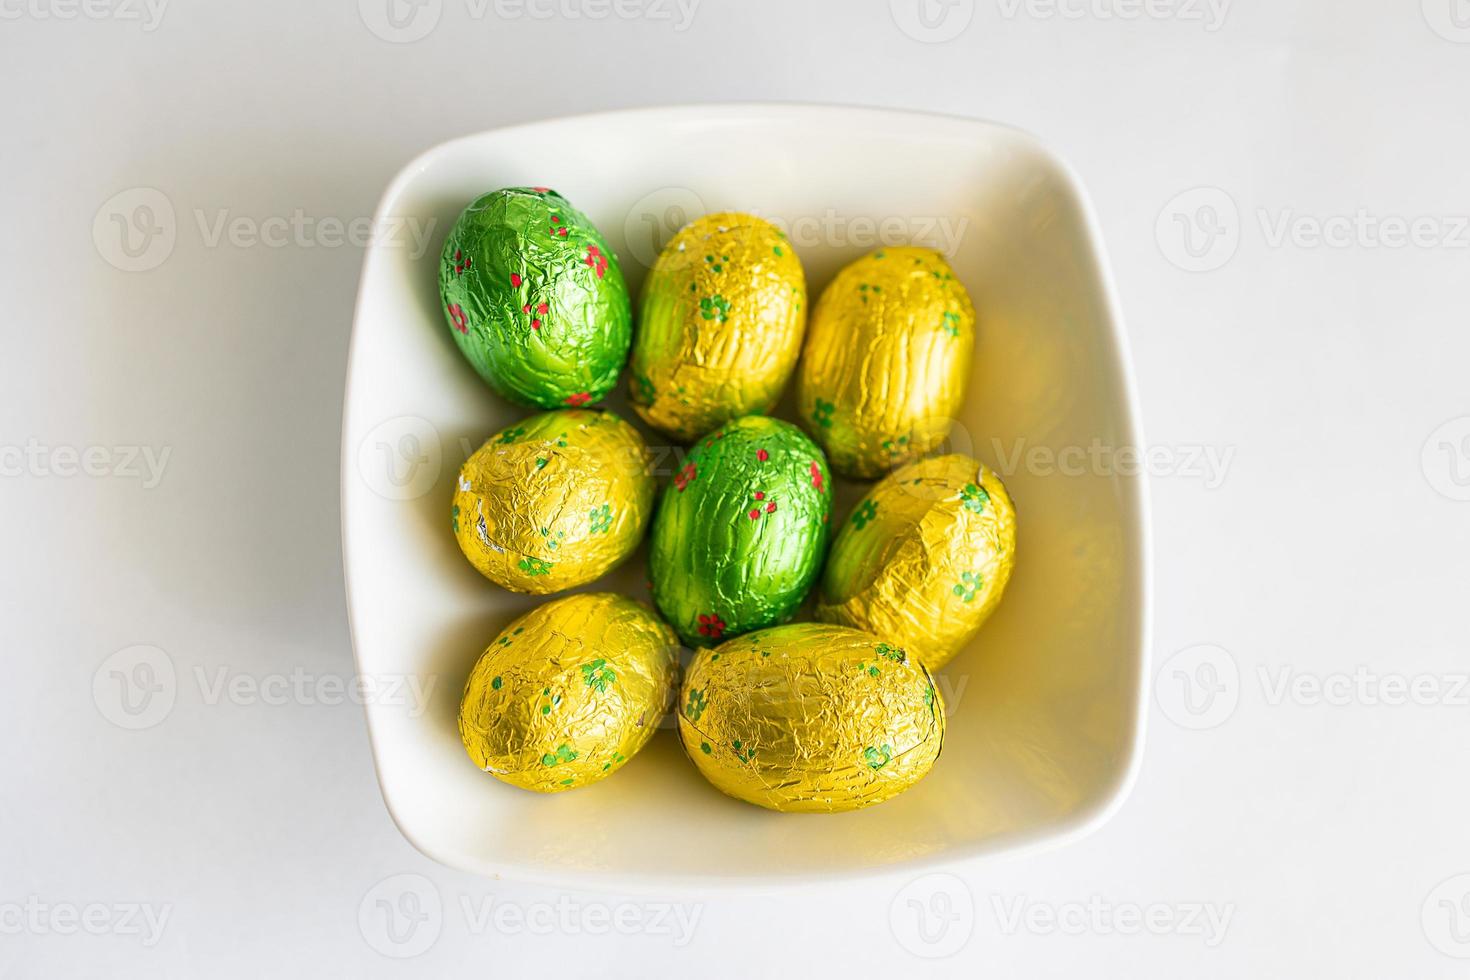 little chocolate eggs in a white cloth on a light background photo